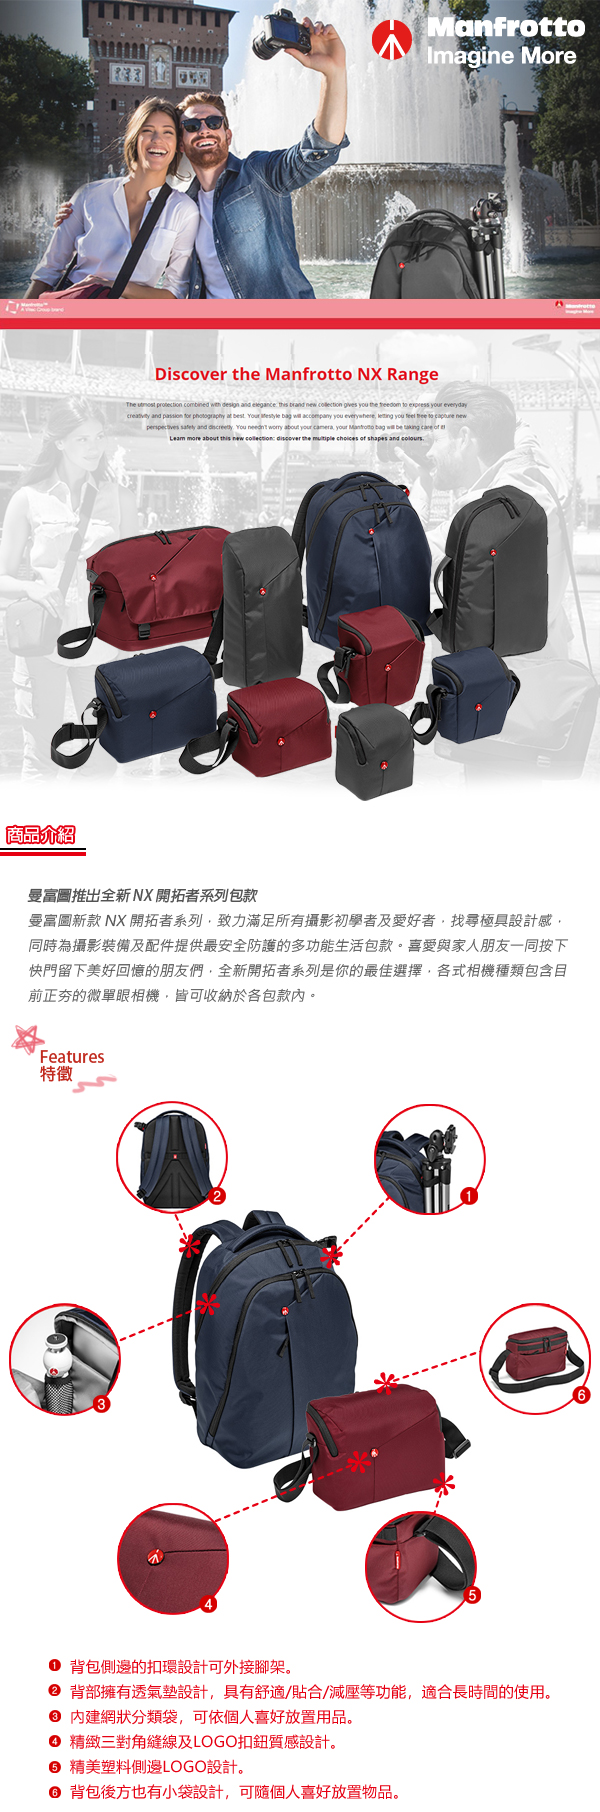 Manfrotto NX Backpack 開拓者雙肩後背包